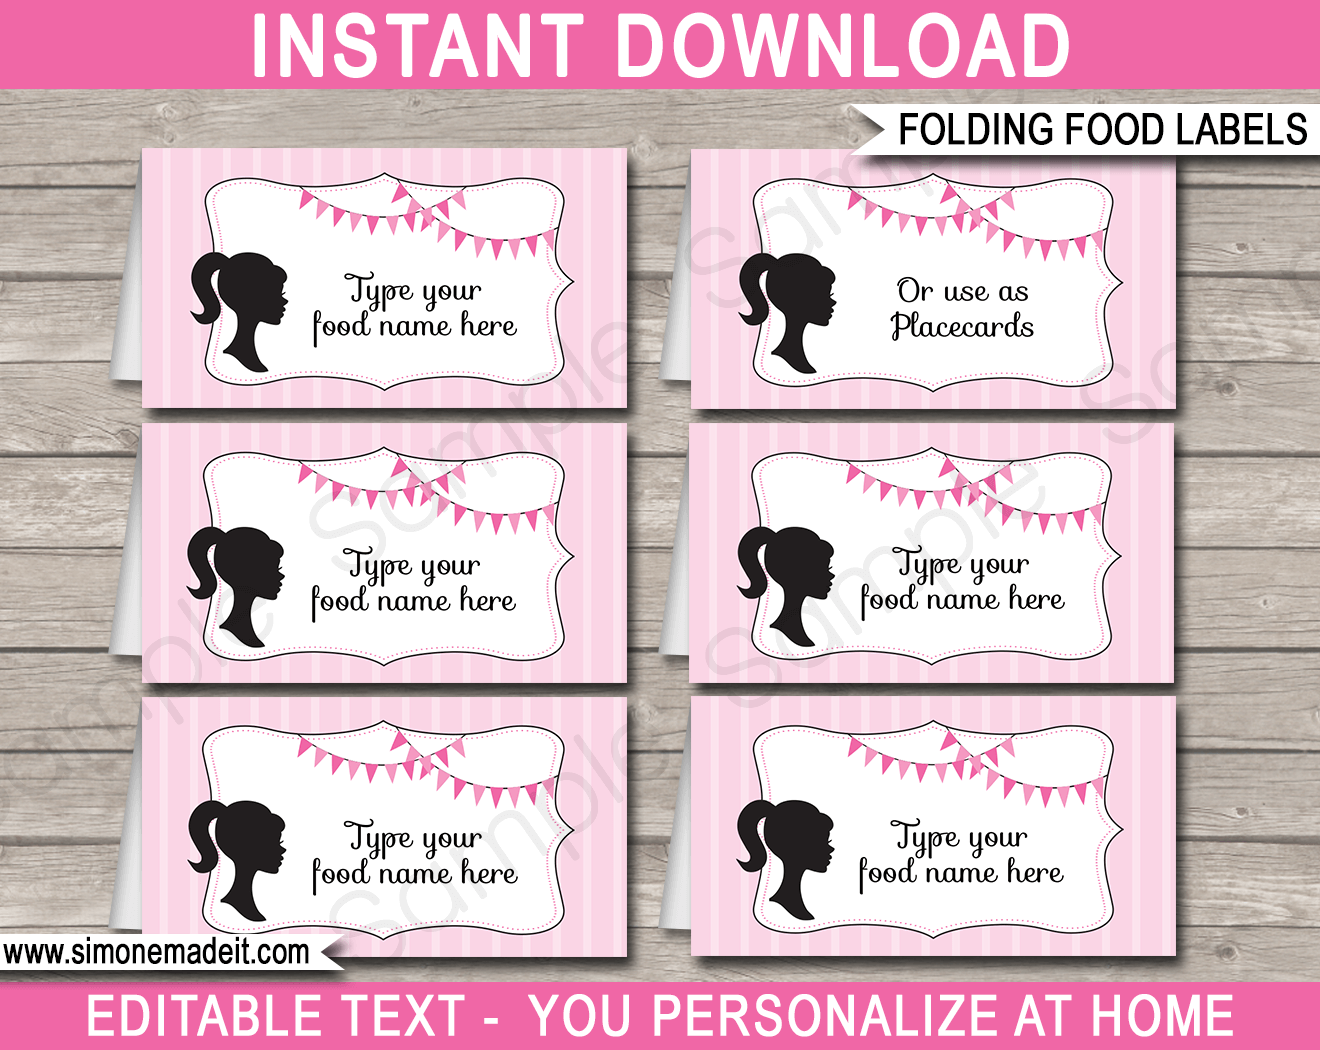 Printable Barbie Party Food Labels | Food Buffet Tags | Tent Cards | Place Cards | Barbie Theme Birthday Party Decorations | DIY Editable Template | Instant Download via simonemadeit.com